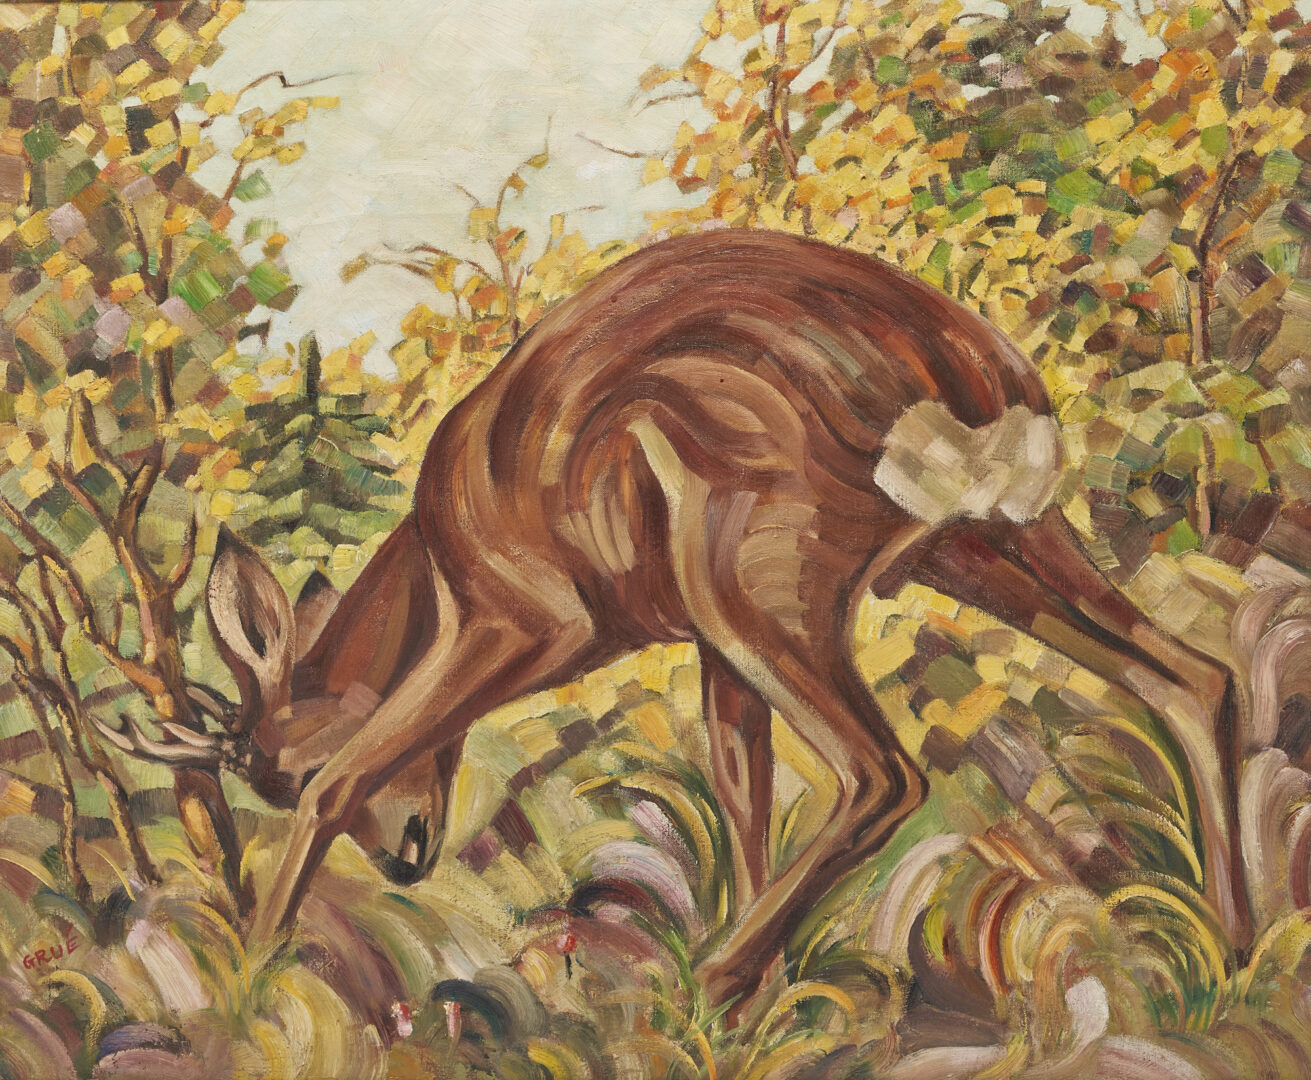 Lot 731: Jack Grue Oil on Canvas Painting of a Deer